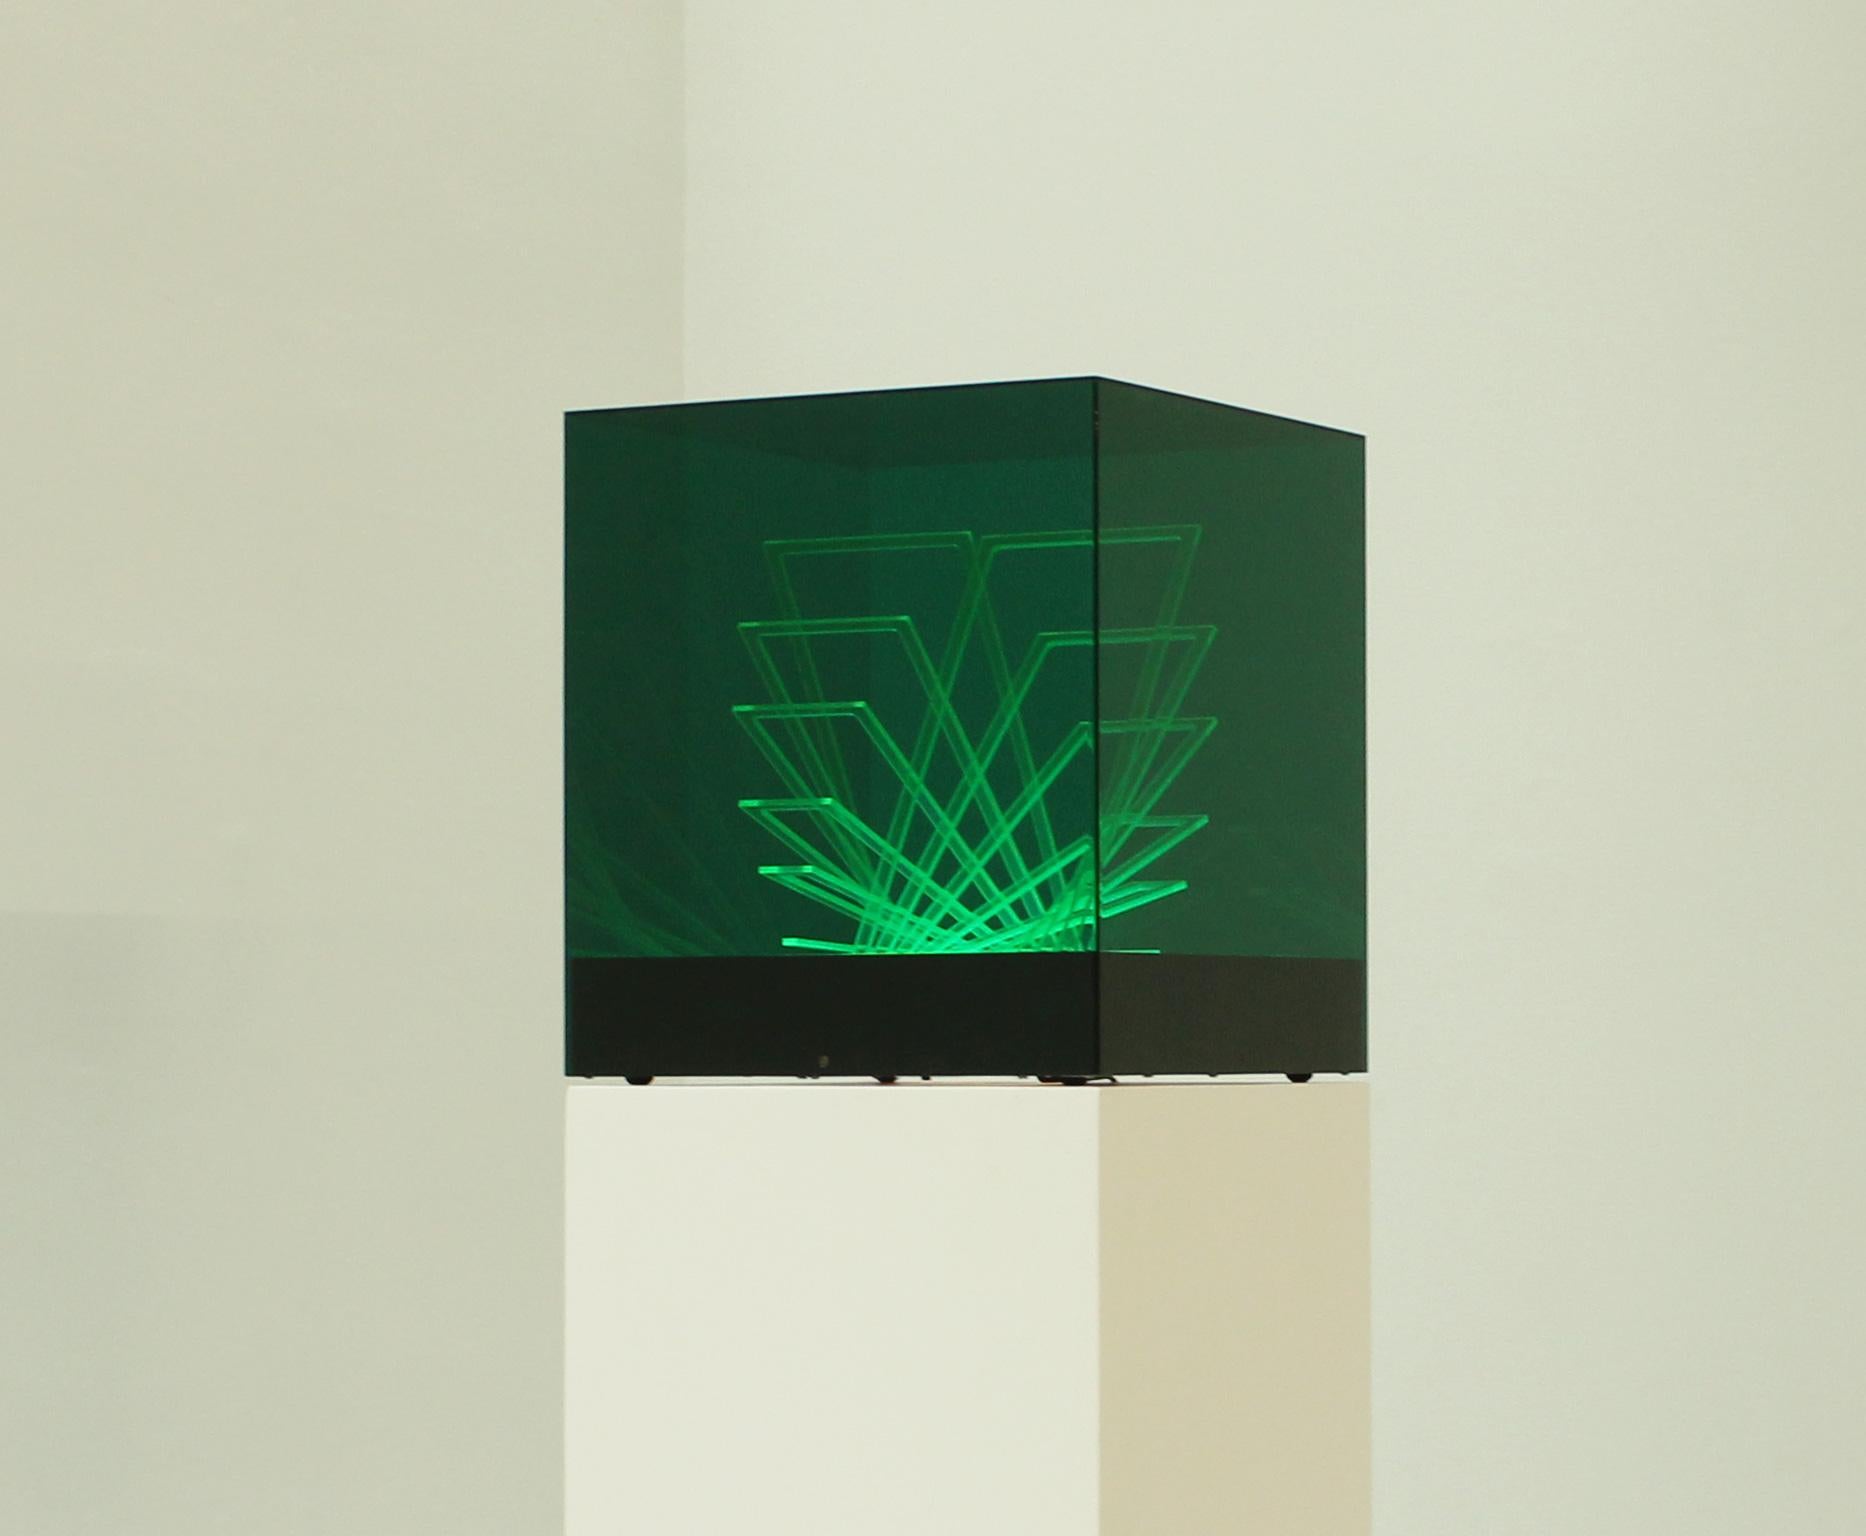 Iluminated sculpture named Cubo di Teo designed by James Rivière in 1970's and edited by Centro Ricerche di Arte Industria Lissone, Italy. Colored acrylic pieces and base with internal light.